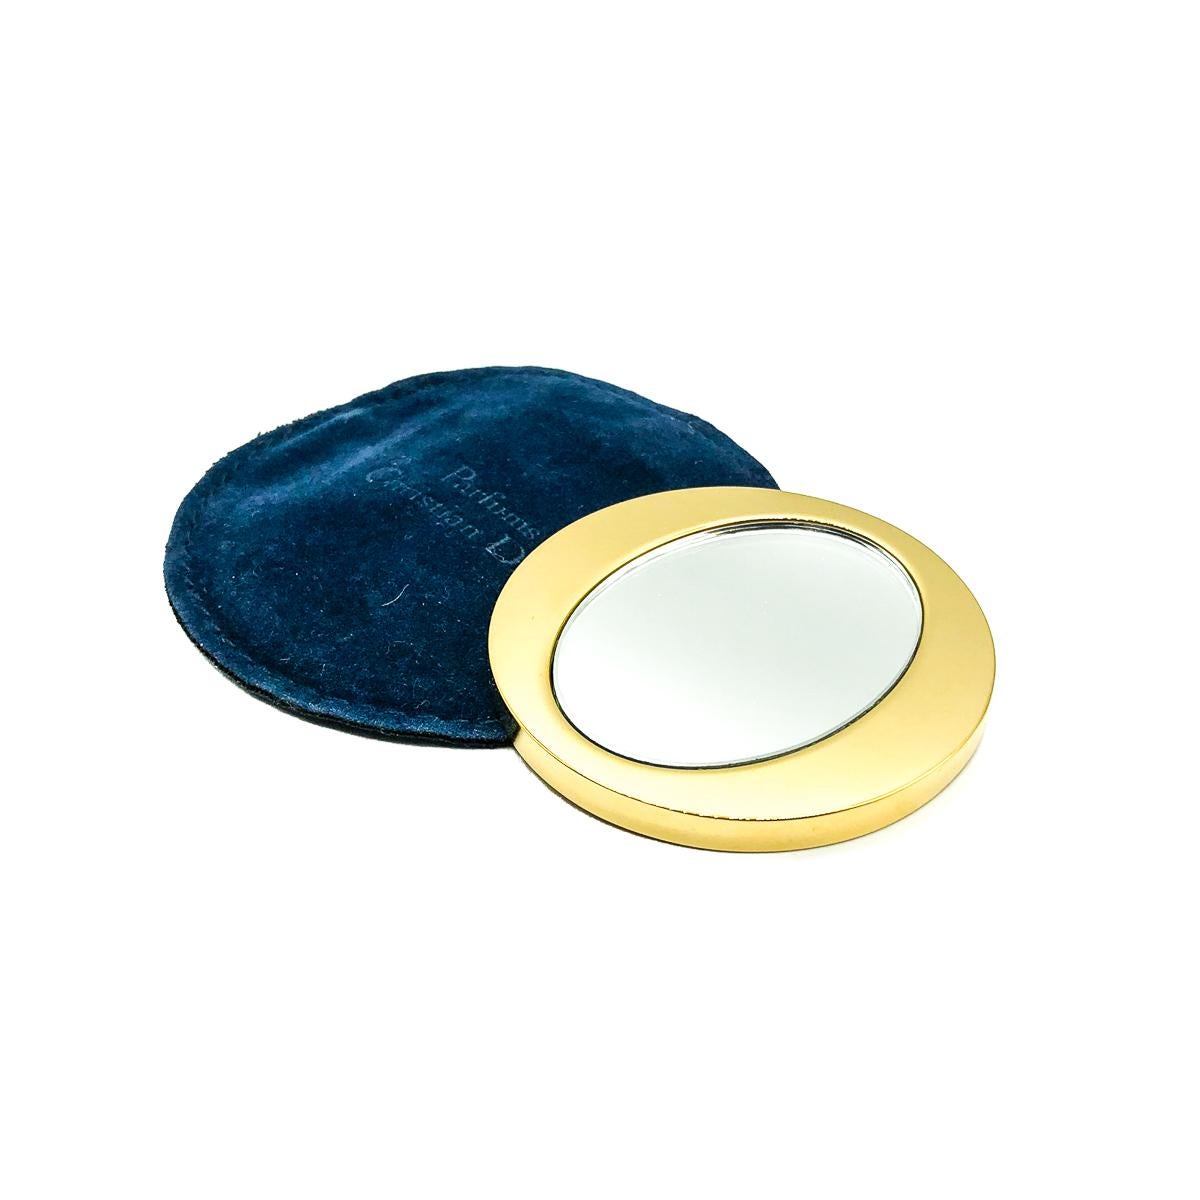 A Vintage Dior Vanity Mirror. Crafted in gold plated metal. In very good vintage condition, signed and approx. 5.8cm. A superb designer accessory from the timeless house of Dior to pop in your fave designer bag.

Established in 2016, this is a